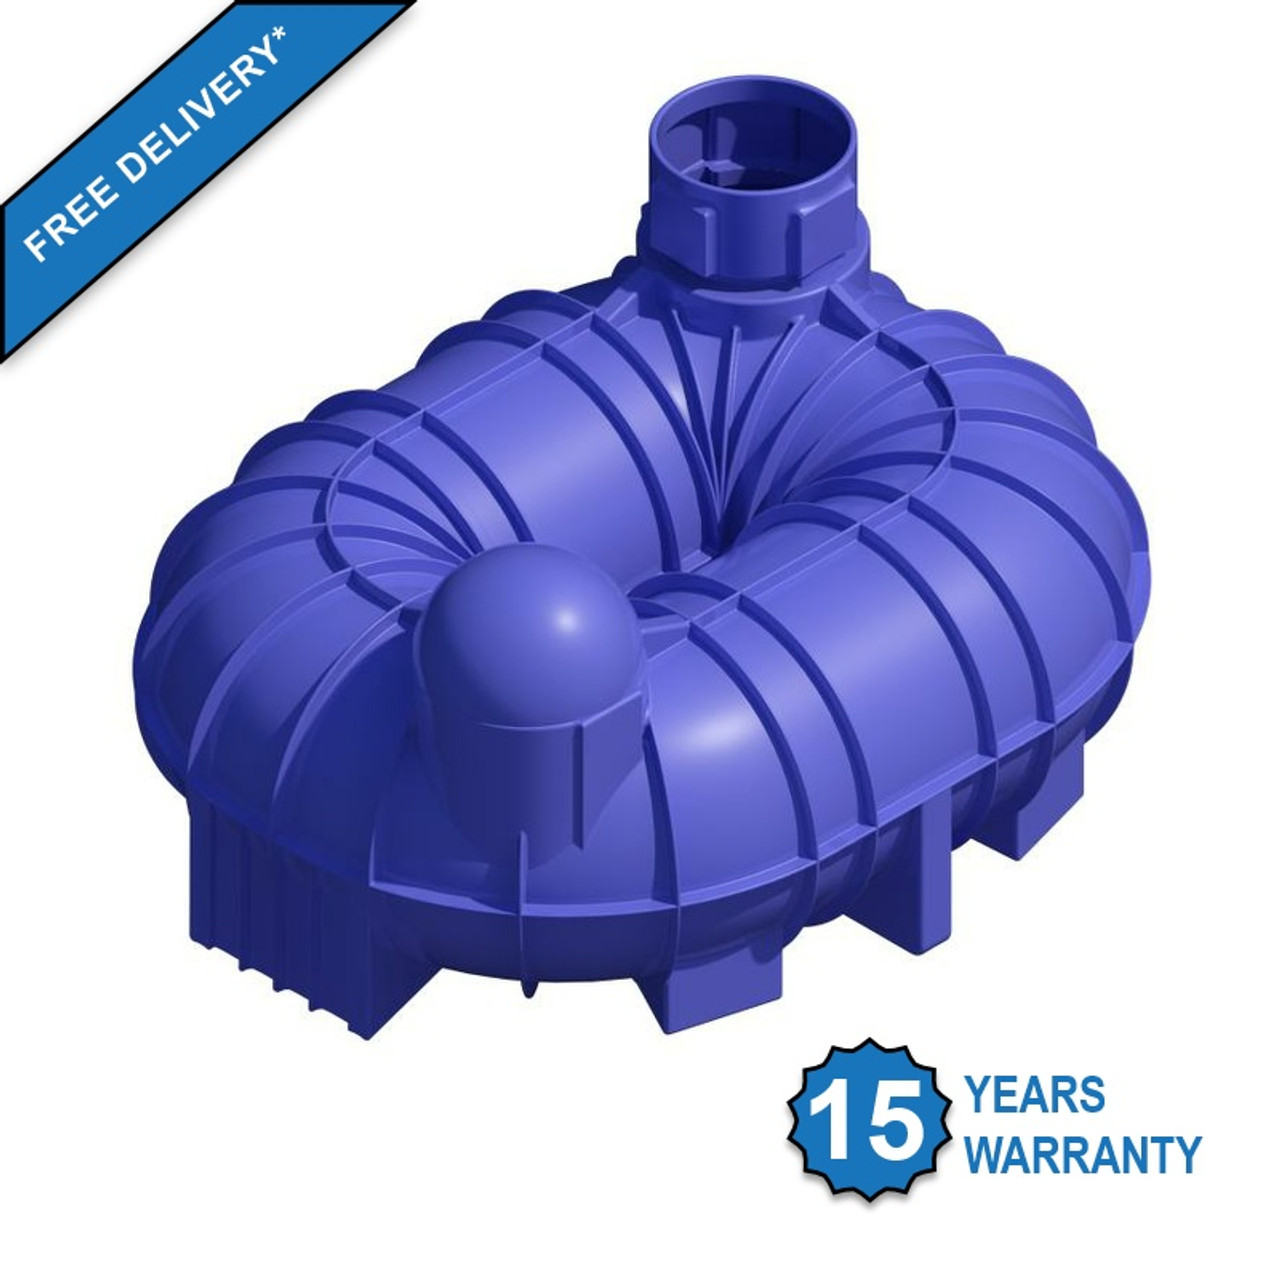 6800 Litre (1495 Gallon) Underground Non-Potable Water Tank (Twin Access) - Free Delivery & 15 Year Warranty